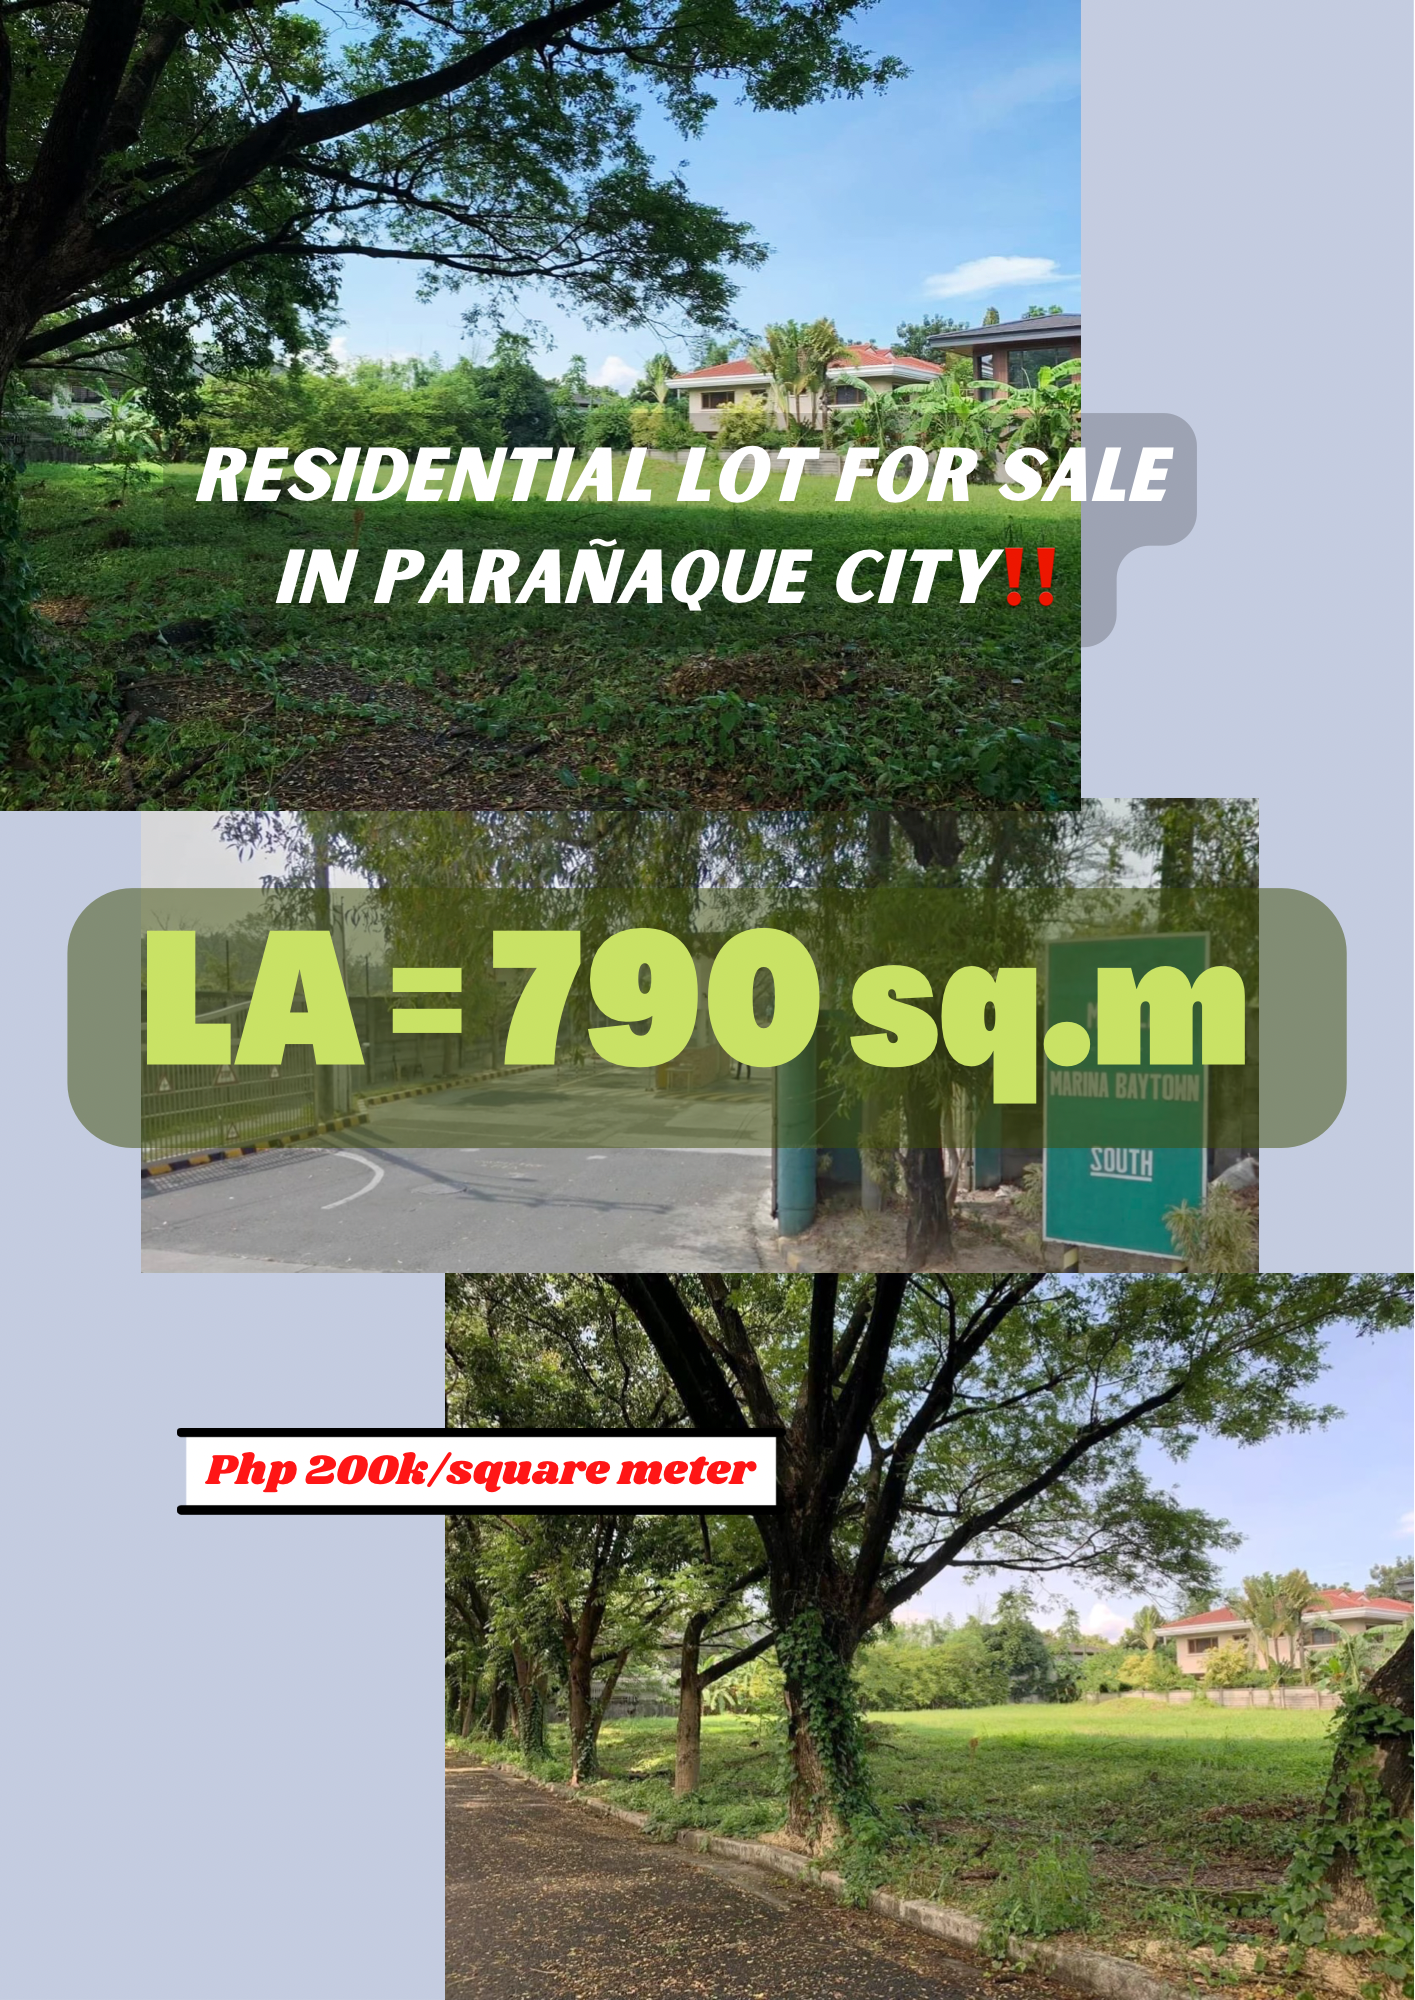 RESIDENTIAL LOT FOR SALE in Marina Bay South, Parañaque City‼️